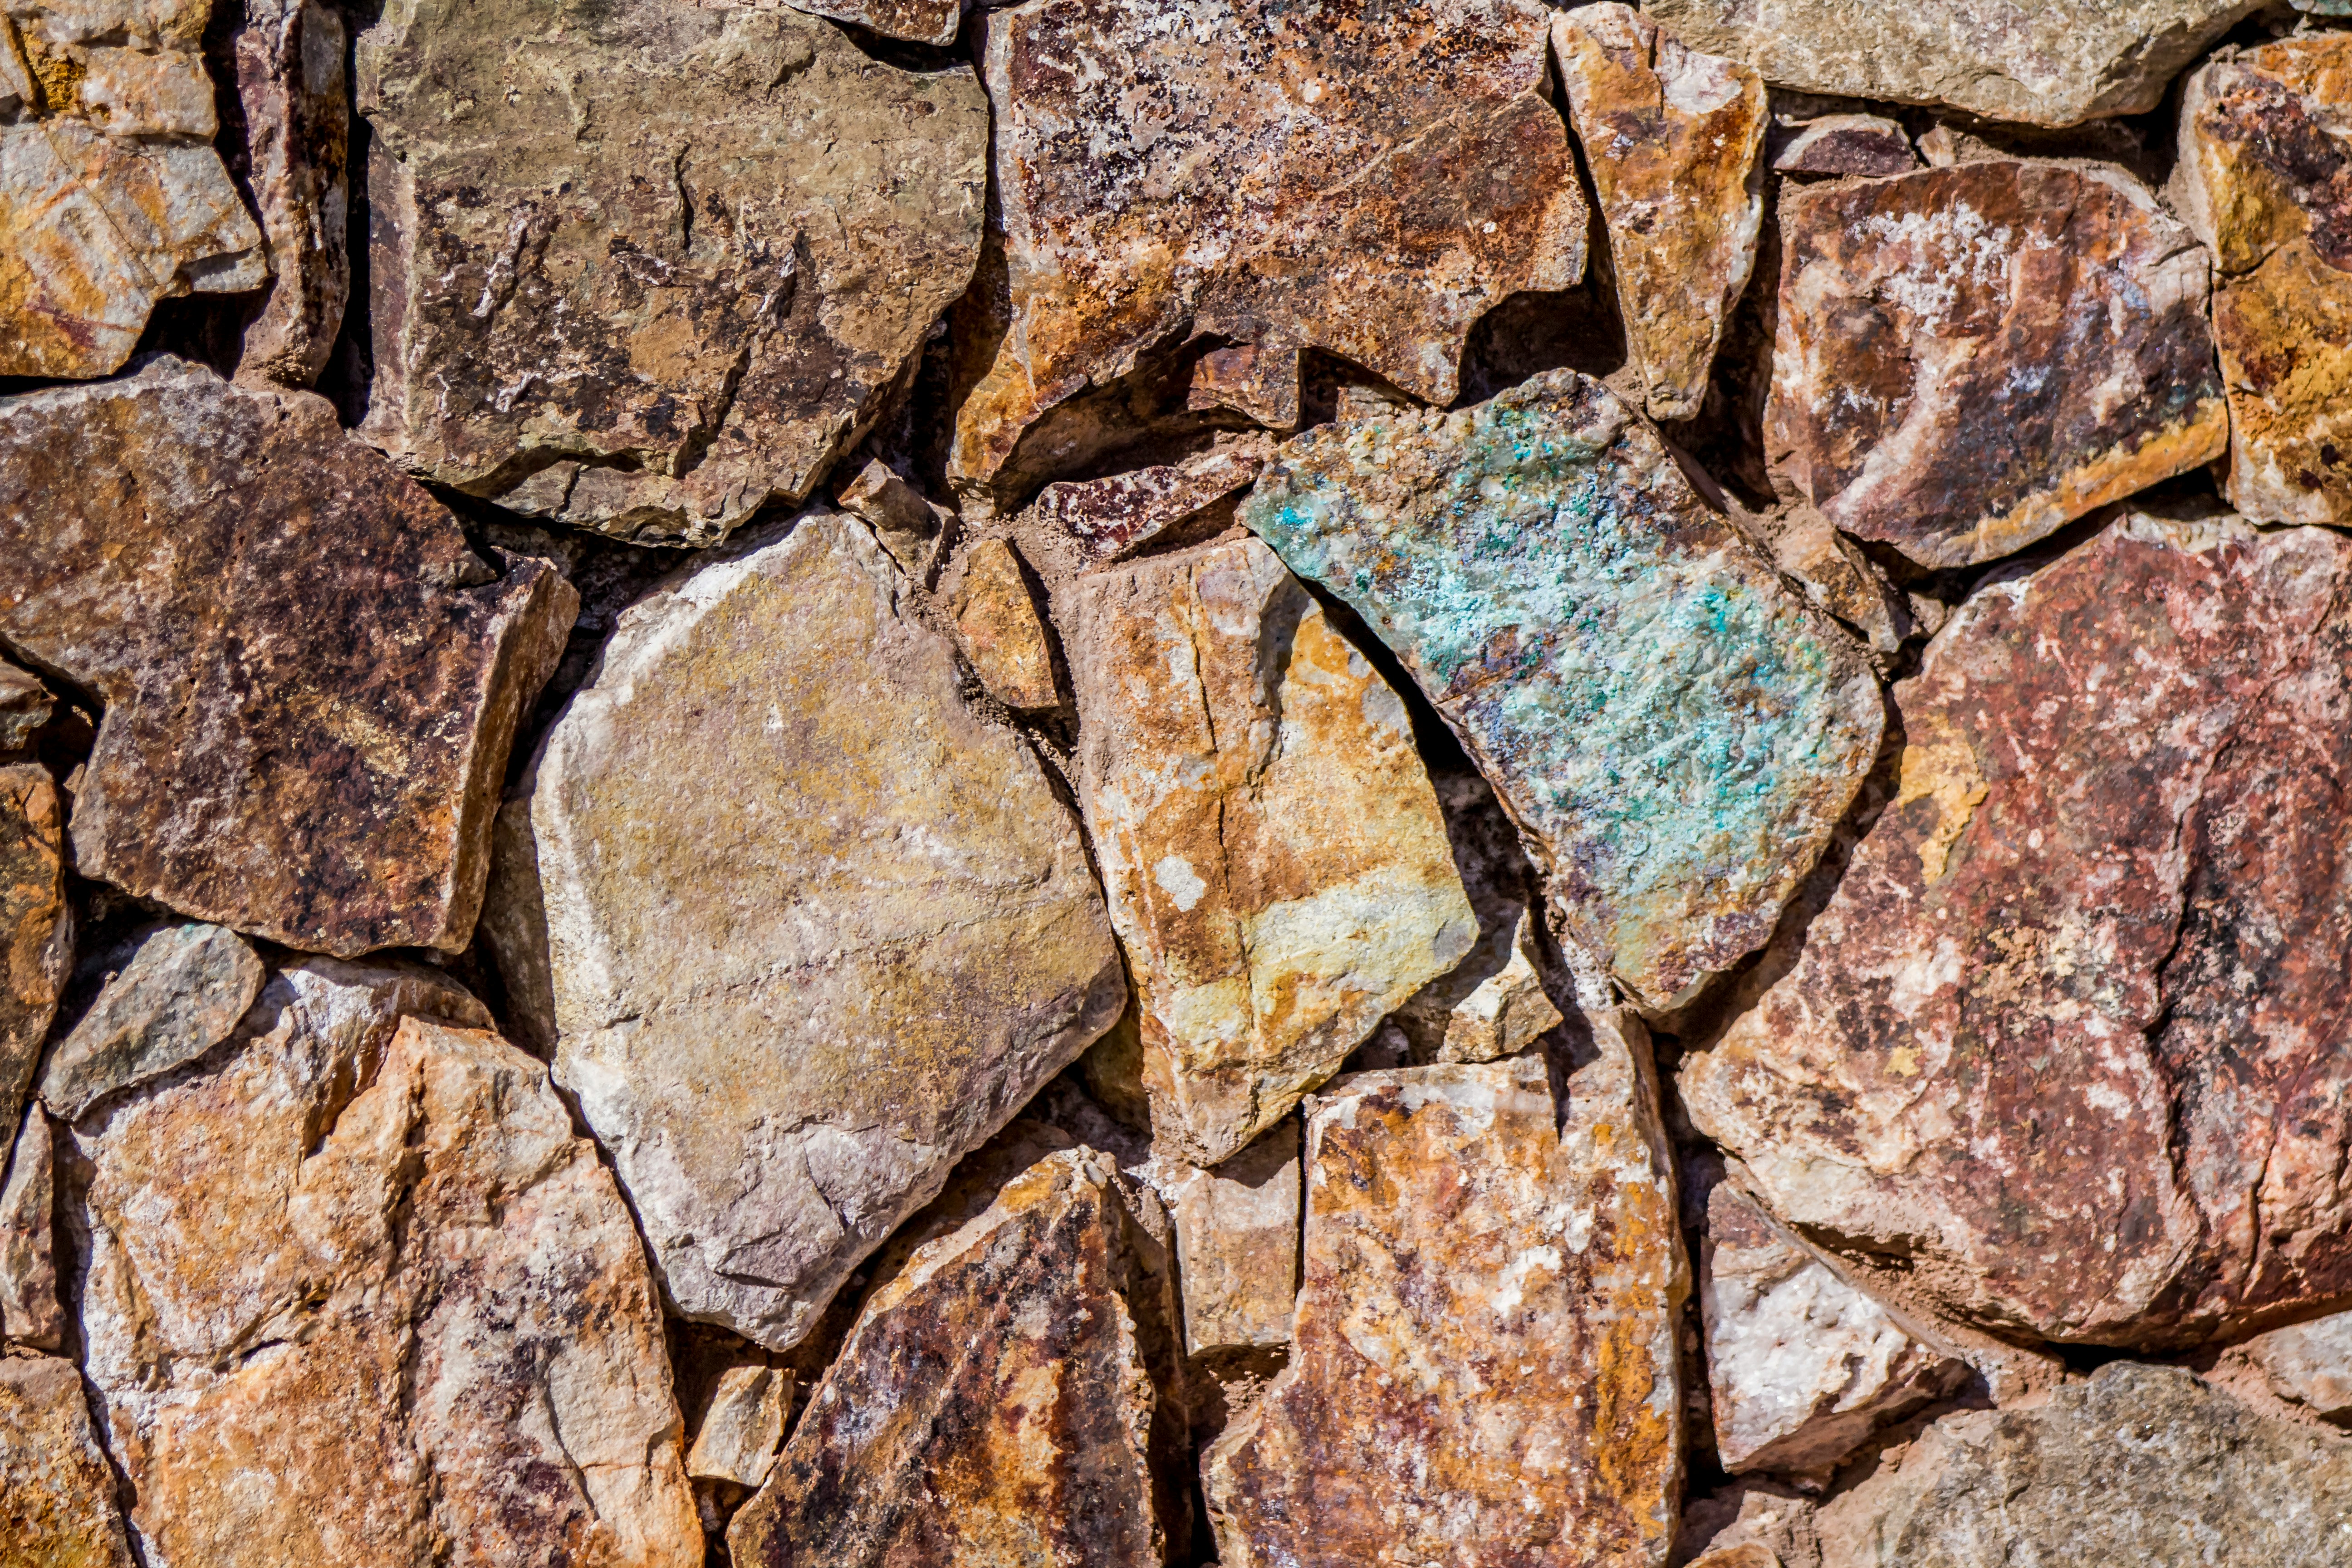 close up photo of assorted-colored piled rocks